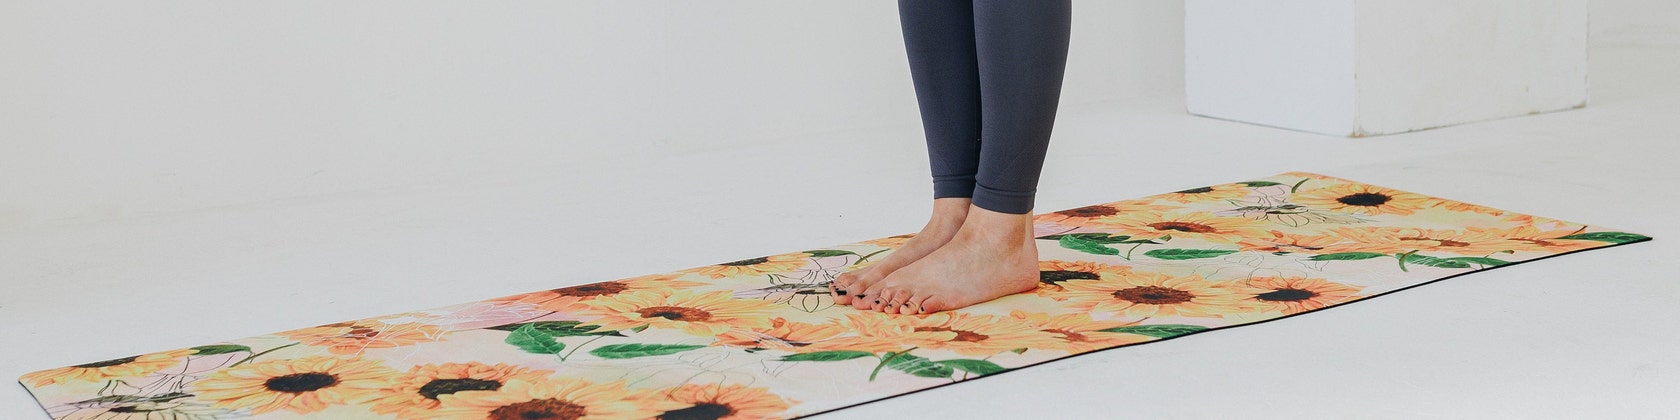 POPFLEX Active - YOU GUYS!!! The new yoga mats in Boho